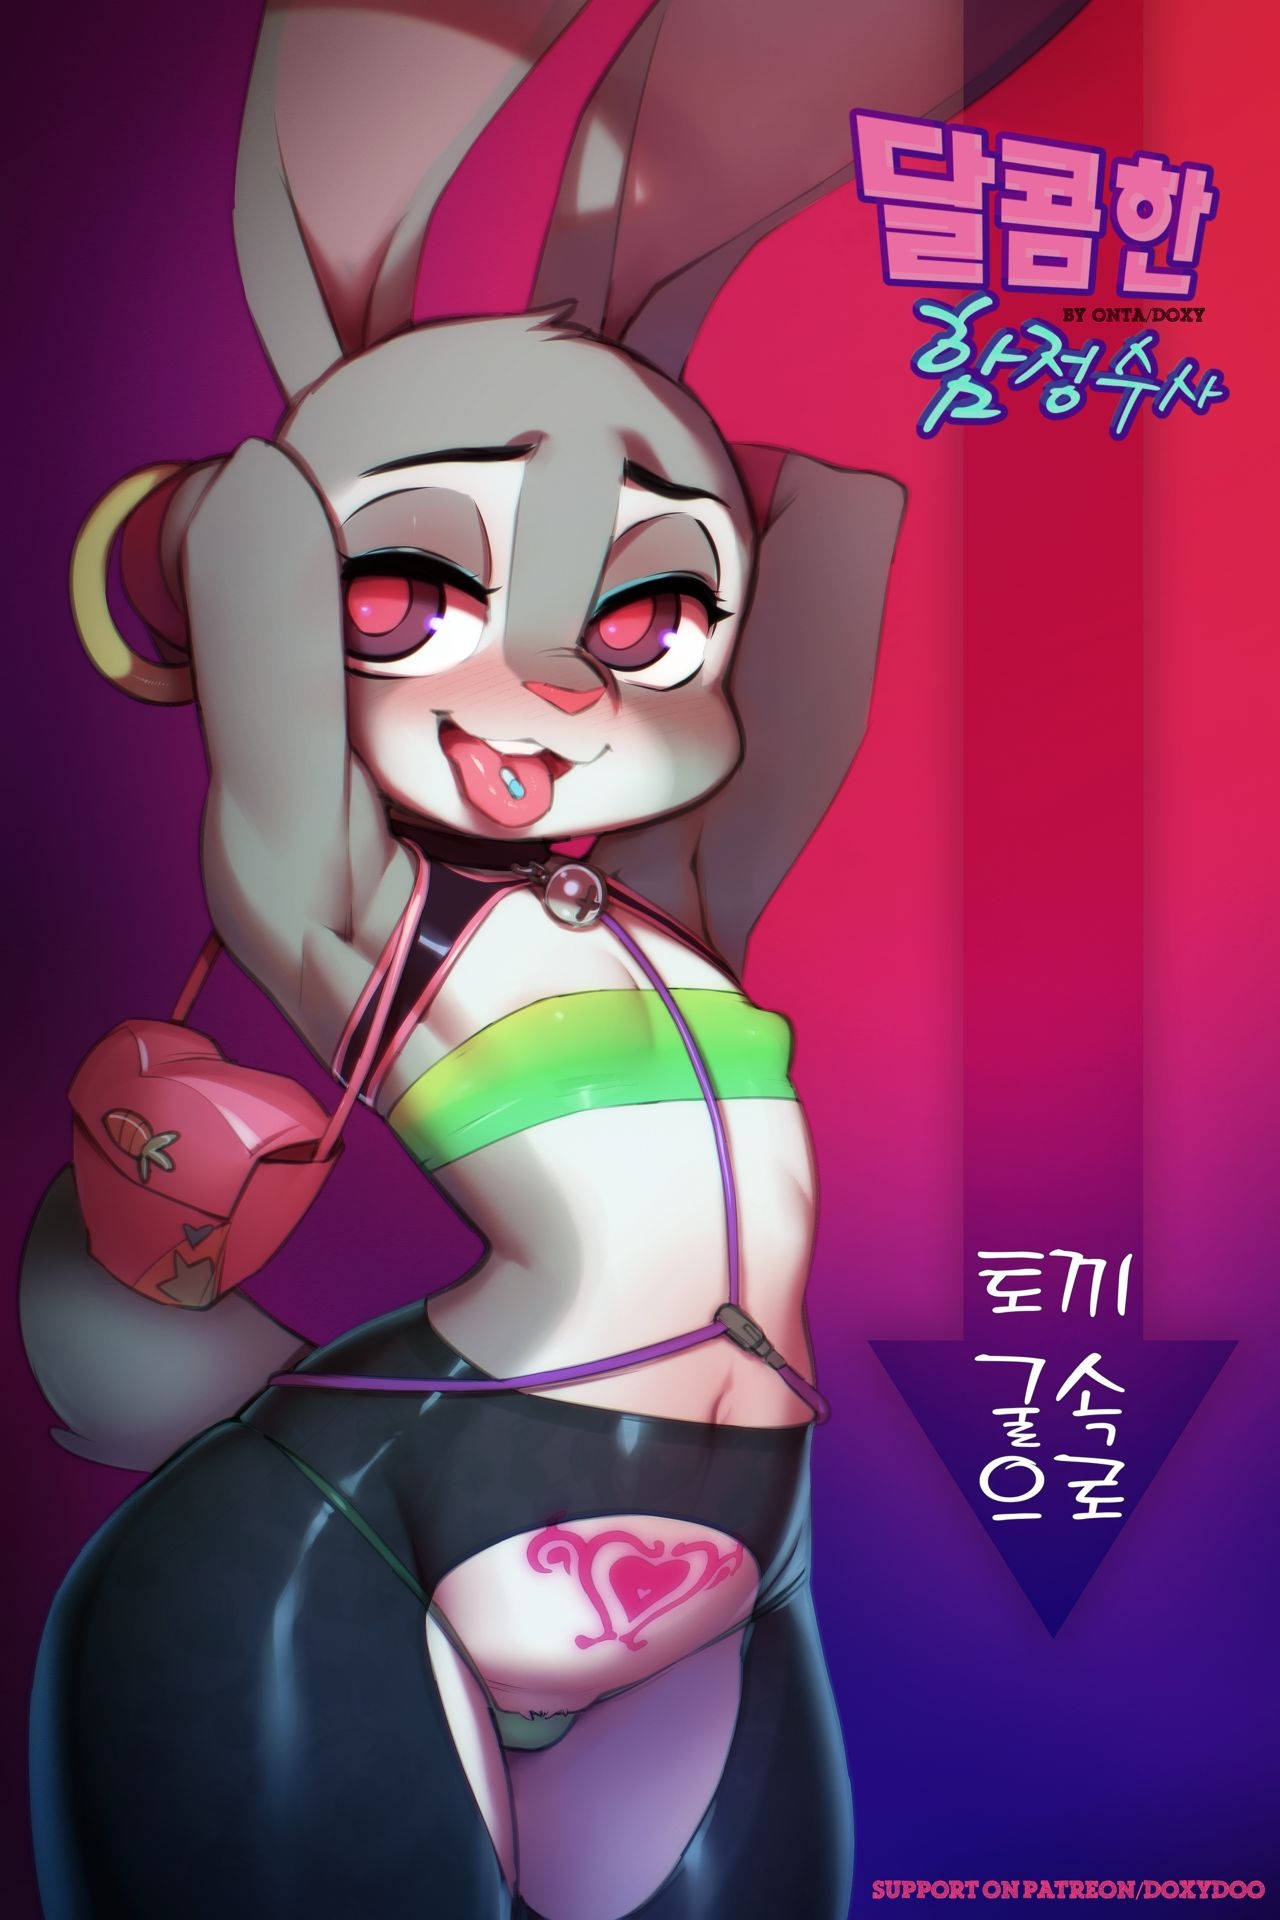 [Doxy] Sweet Sting Part 2: Down The Rabbit Hole | 달콤한 함정수사 2부: 토끼 굴속으로 (Zootopia) [Korean] [Ongoing] 0